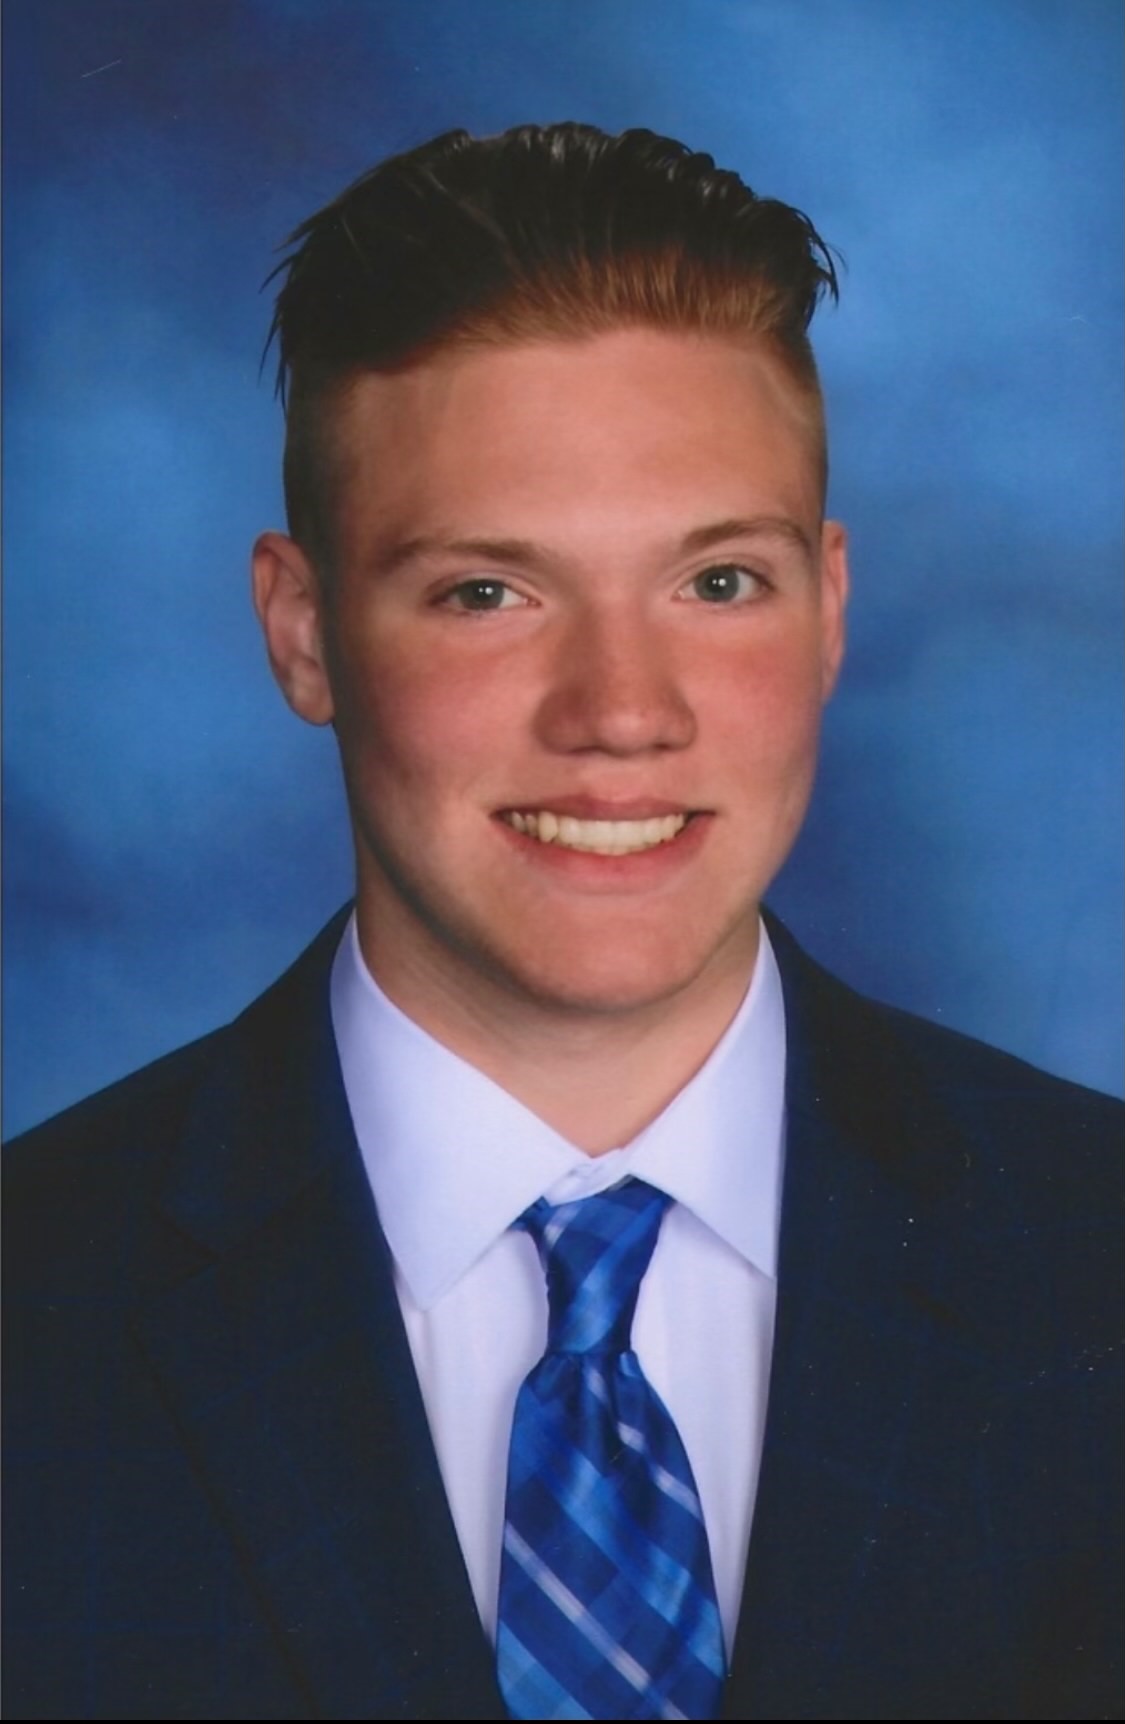 headshot of a student in a suit